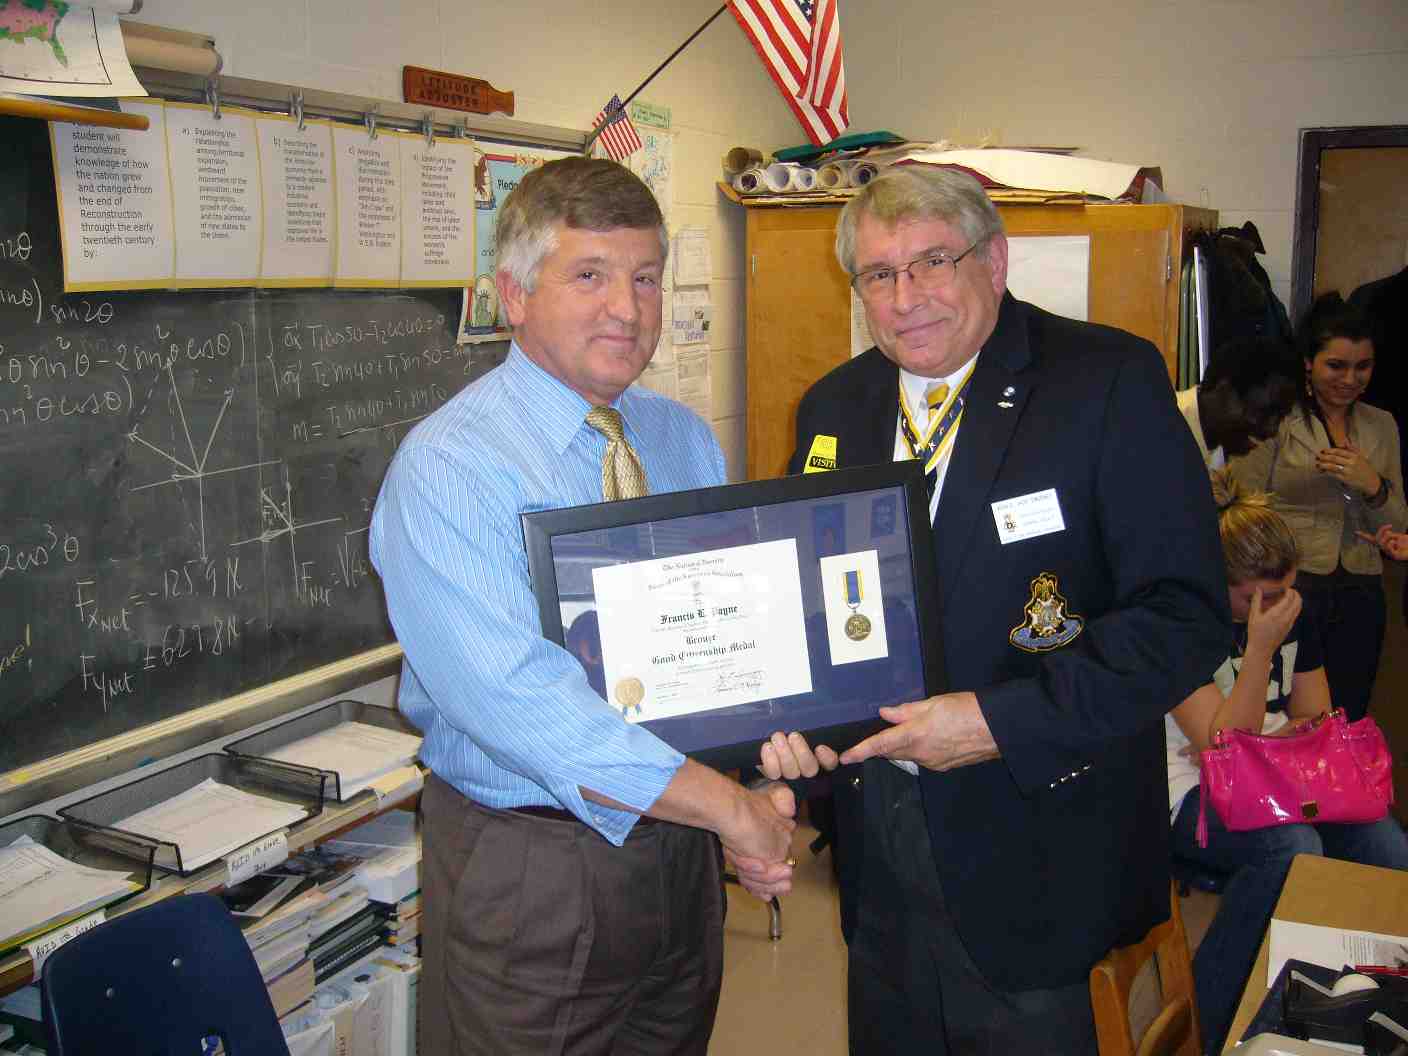 In the attached photo, Fairfax Resolves Chapter President, John E. Sweeney, presents Mr. Payne with a professionaly framed Bronze Citizenship Medal Certificate and mounted medal. 